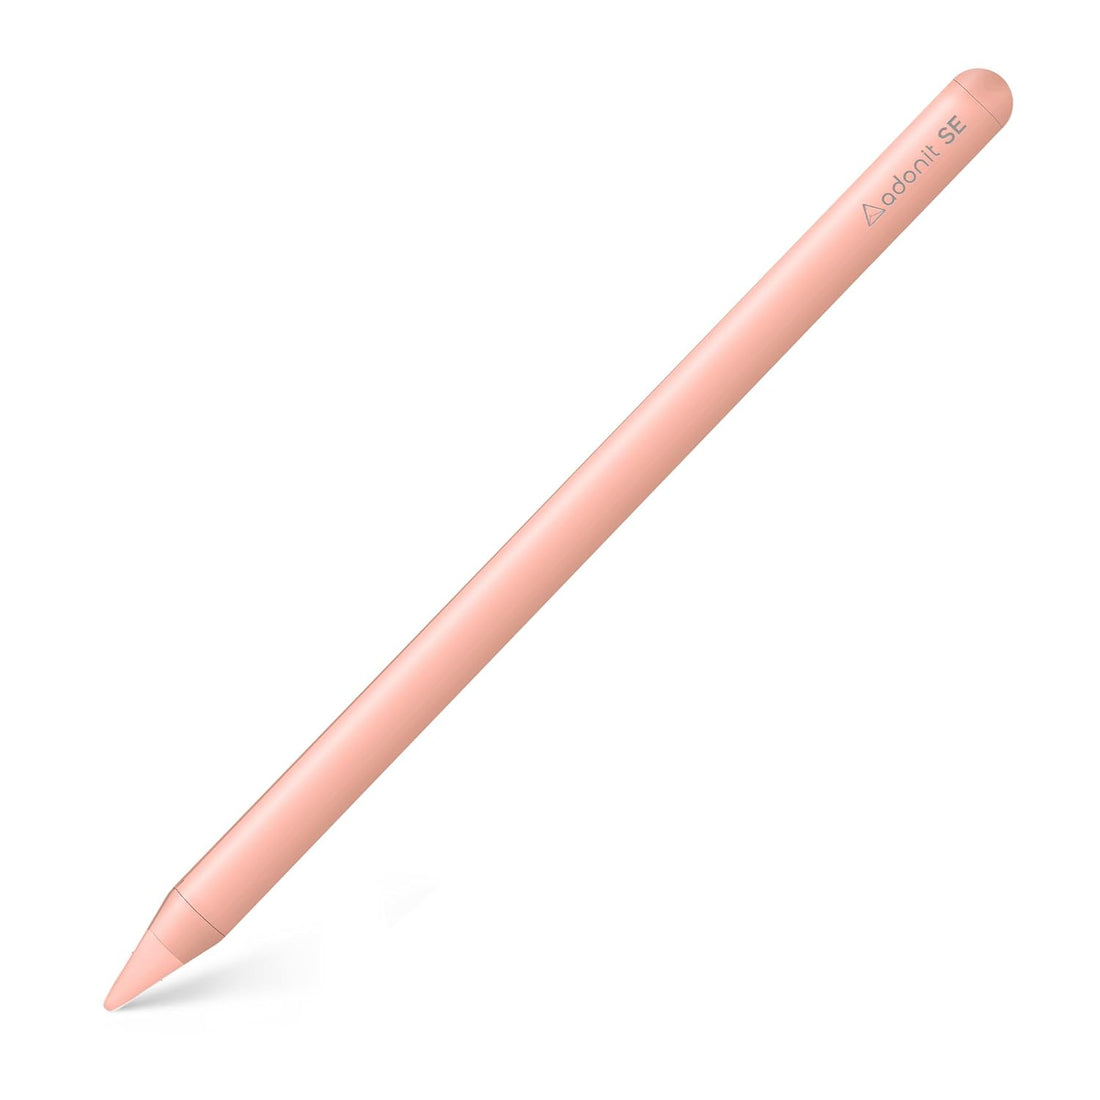 Adonit SE(Pink) Magnetically Attachable Palm Rejection Pencil for Writing/Drawing Stylus Compatible w iPad 6th-10th, iPad Mini 5th/6th, iPad Air 3rd-5th, iPad Pro 11" 1st-4th, iPad Pro 12.9" 3rd-6th